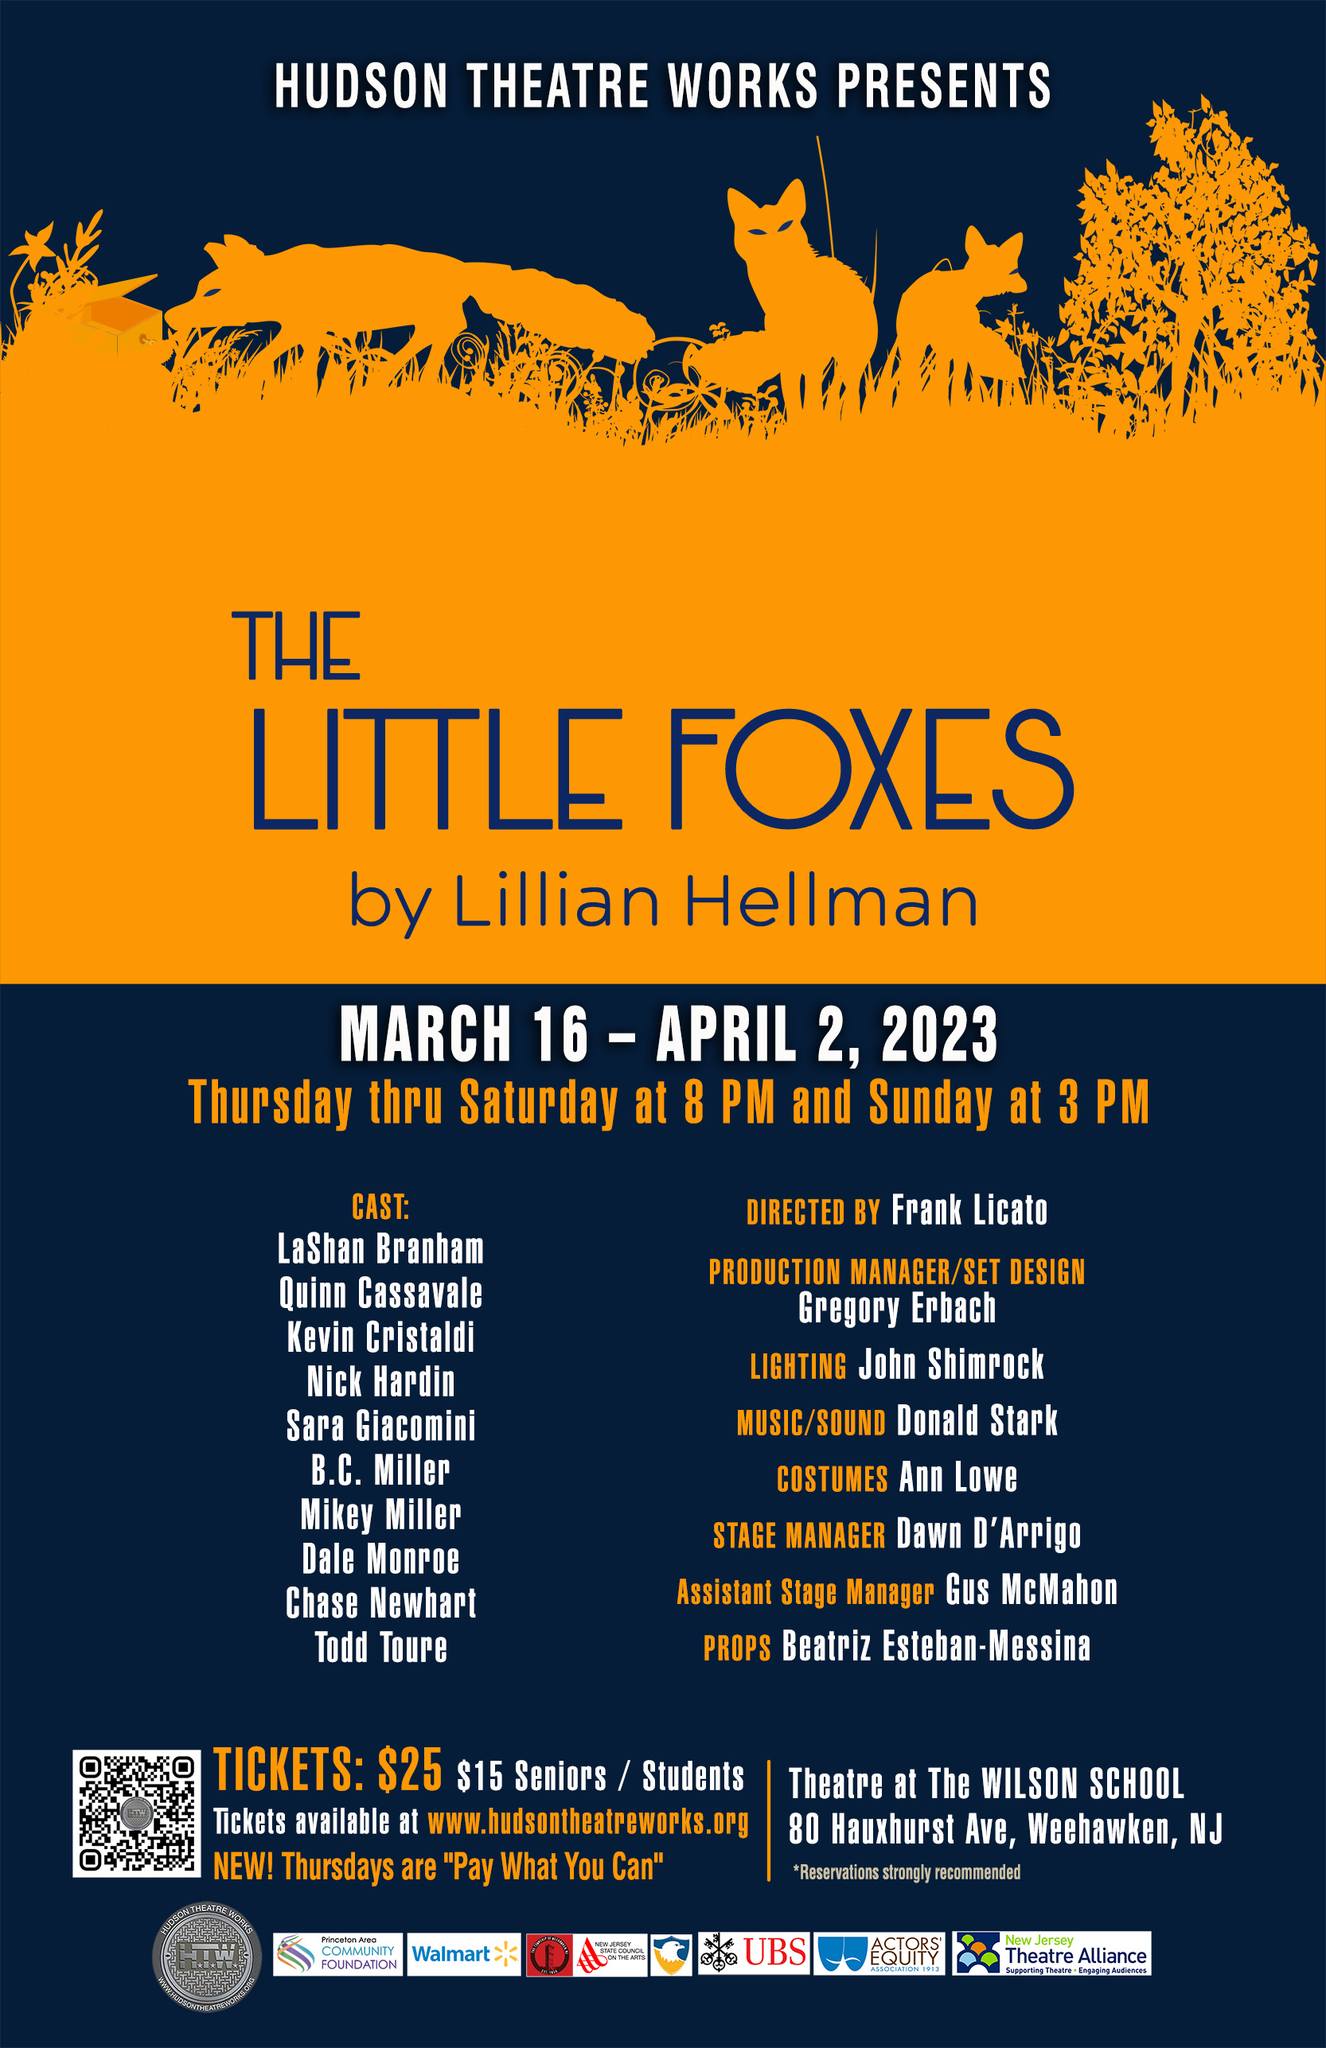 Hudson Theatre Works presents The Little Foxes flyer; March 16th - April 2nd, 2023 Thursday thru Saturday at 8pm and Sunday 3pm